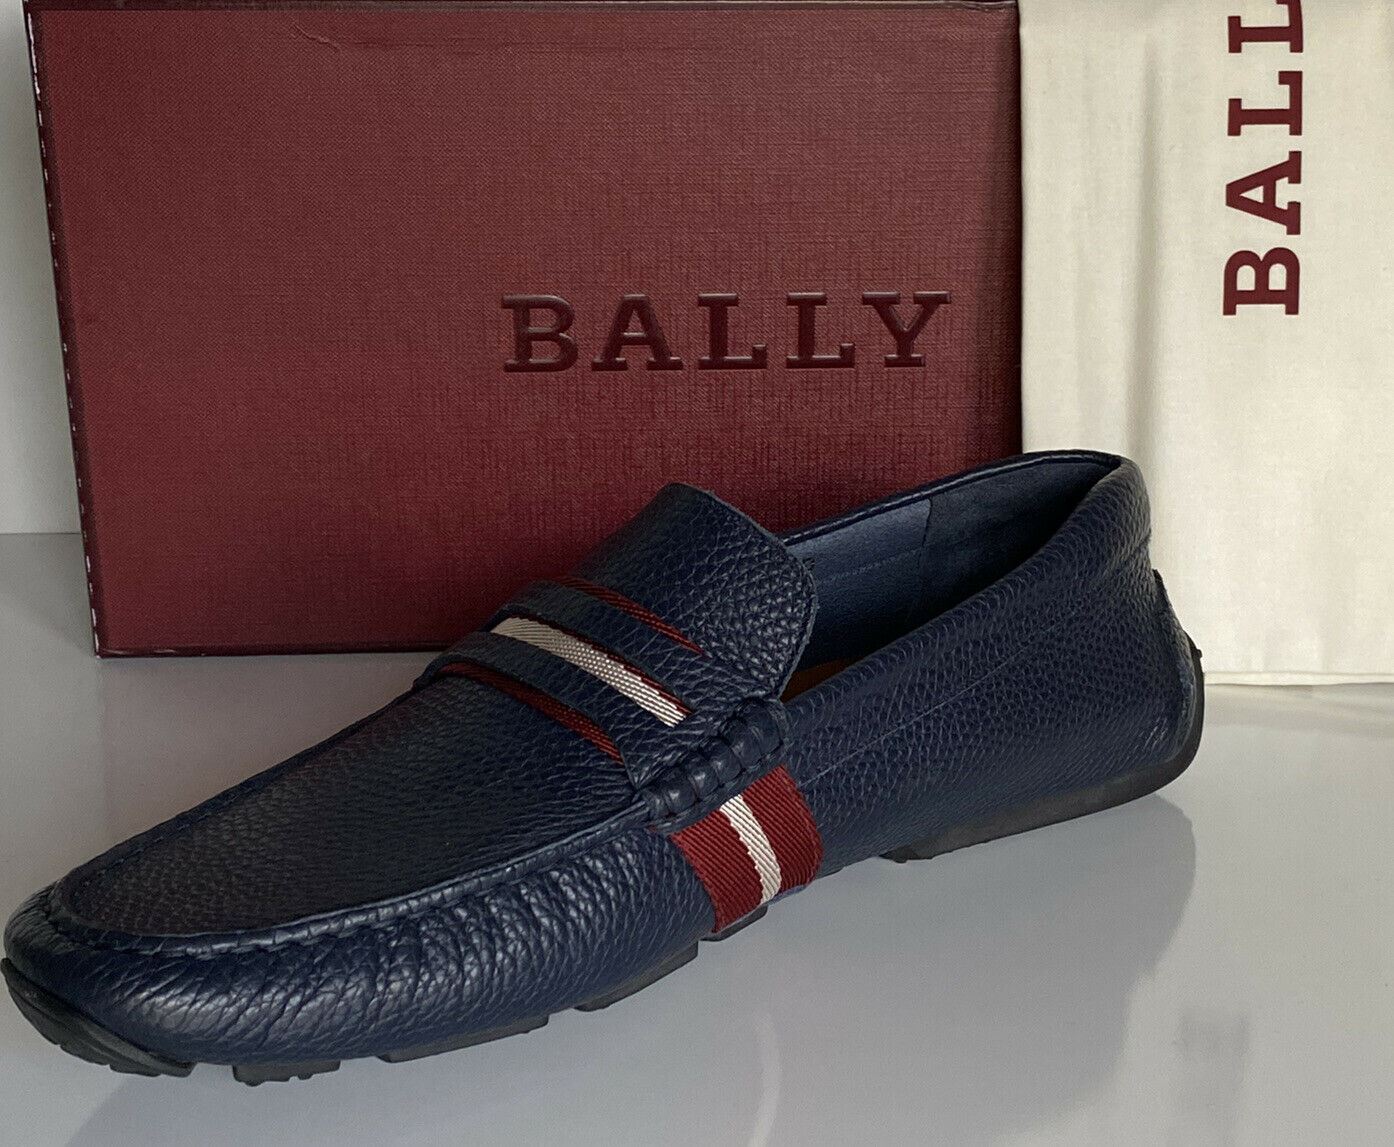 NIB Bally Mens Bovine Grained Leather Driver Shoes Blue 10.5 US 6228300 Italy